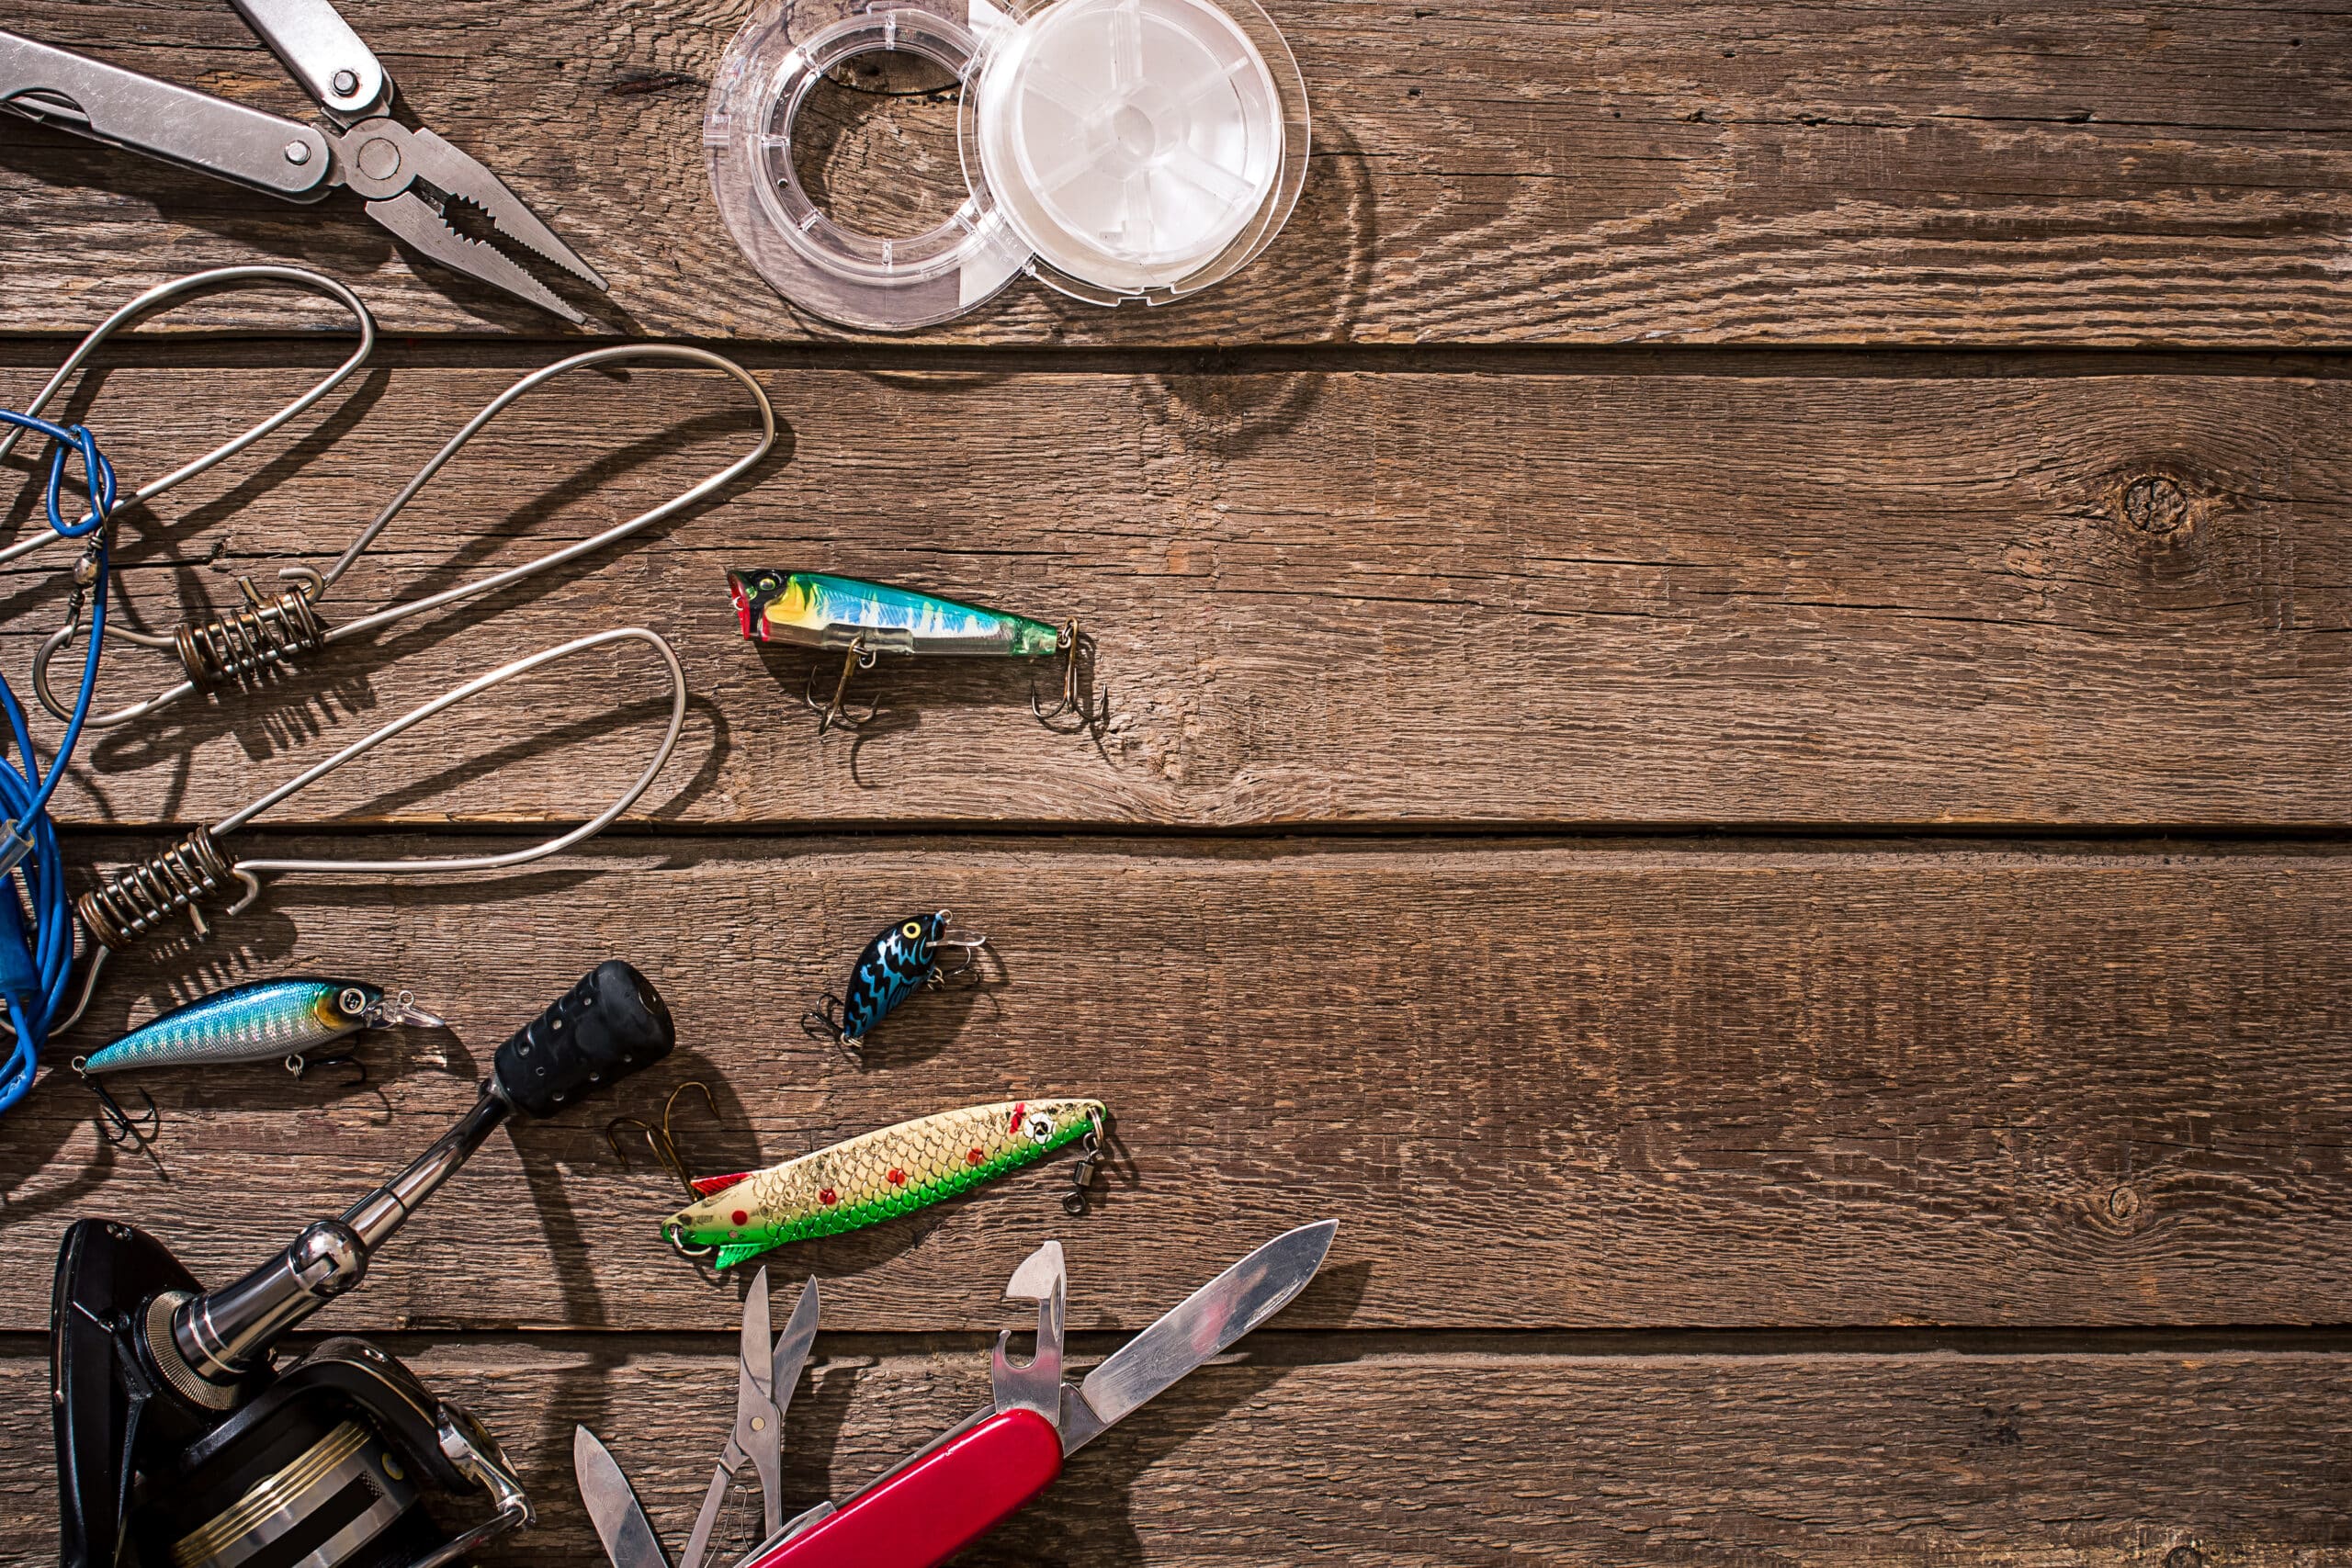 fanatic4fishing.com : Will trout bite lures?